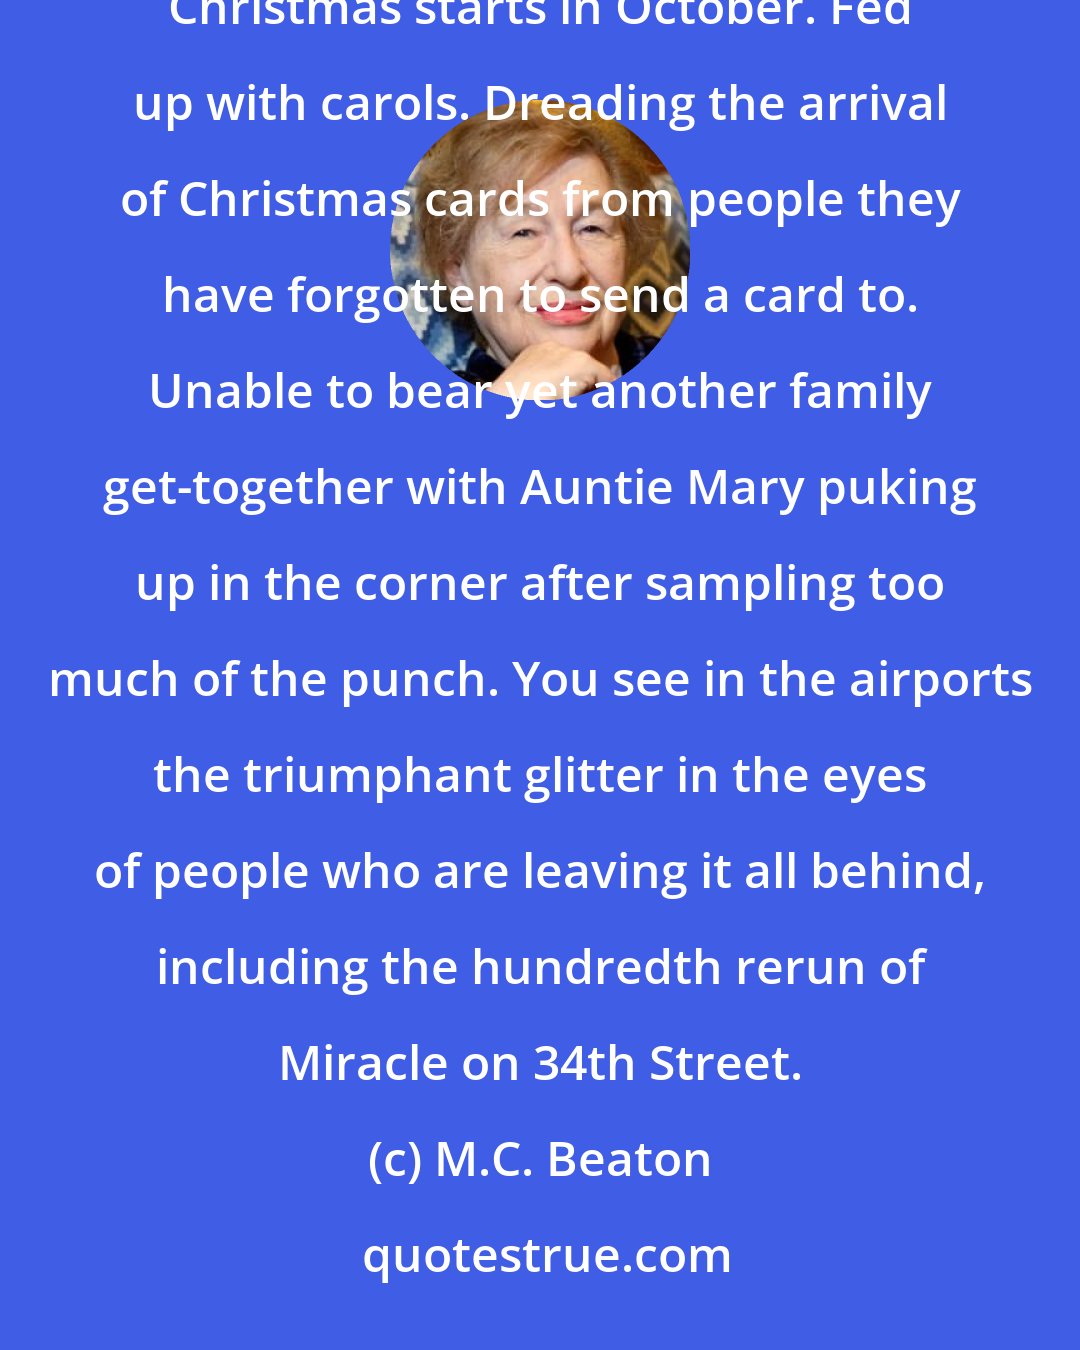 M.C. Beaton: More and more people each year are going abroad for Christmas ... Fed up with the fact that commercial Christmas starts in October. Fed up with carols. Dreading the arrival of Christmas cards from people they have forgotten to send a card to. Unable to bear yet another family get-together with Auntie Mary puking up in the corner after sampling too much of the punch. You see in the airports the triumphant glitter in the eyes of people who are leaving it all behind, including the hundredth rerun of Miracle on 34th Street.